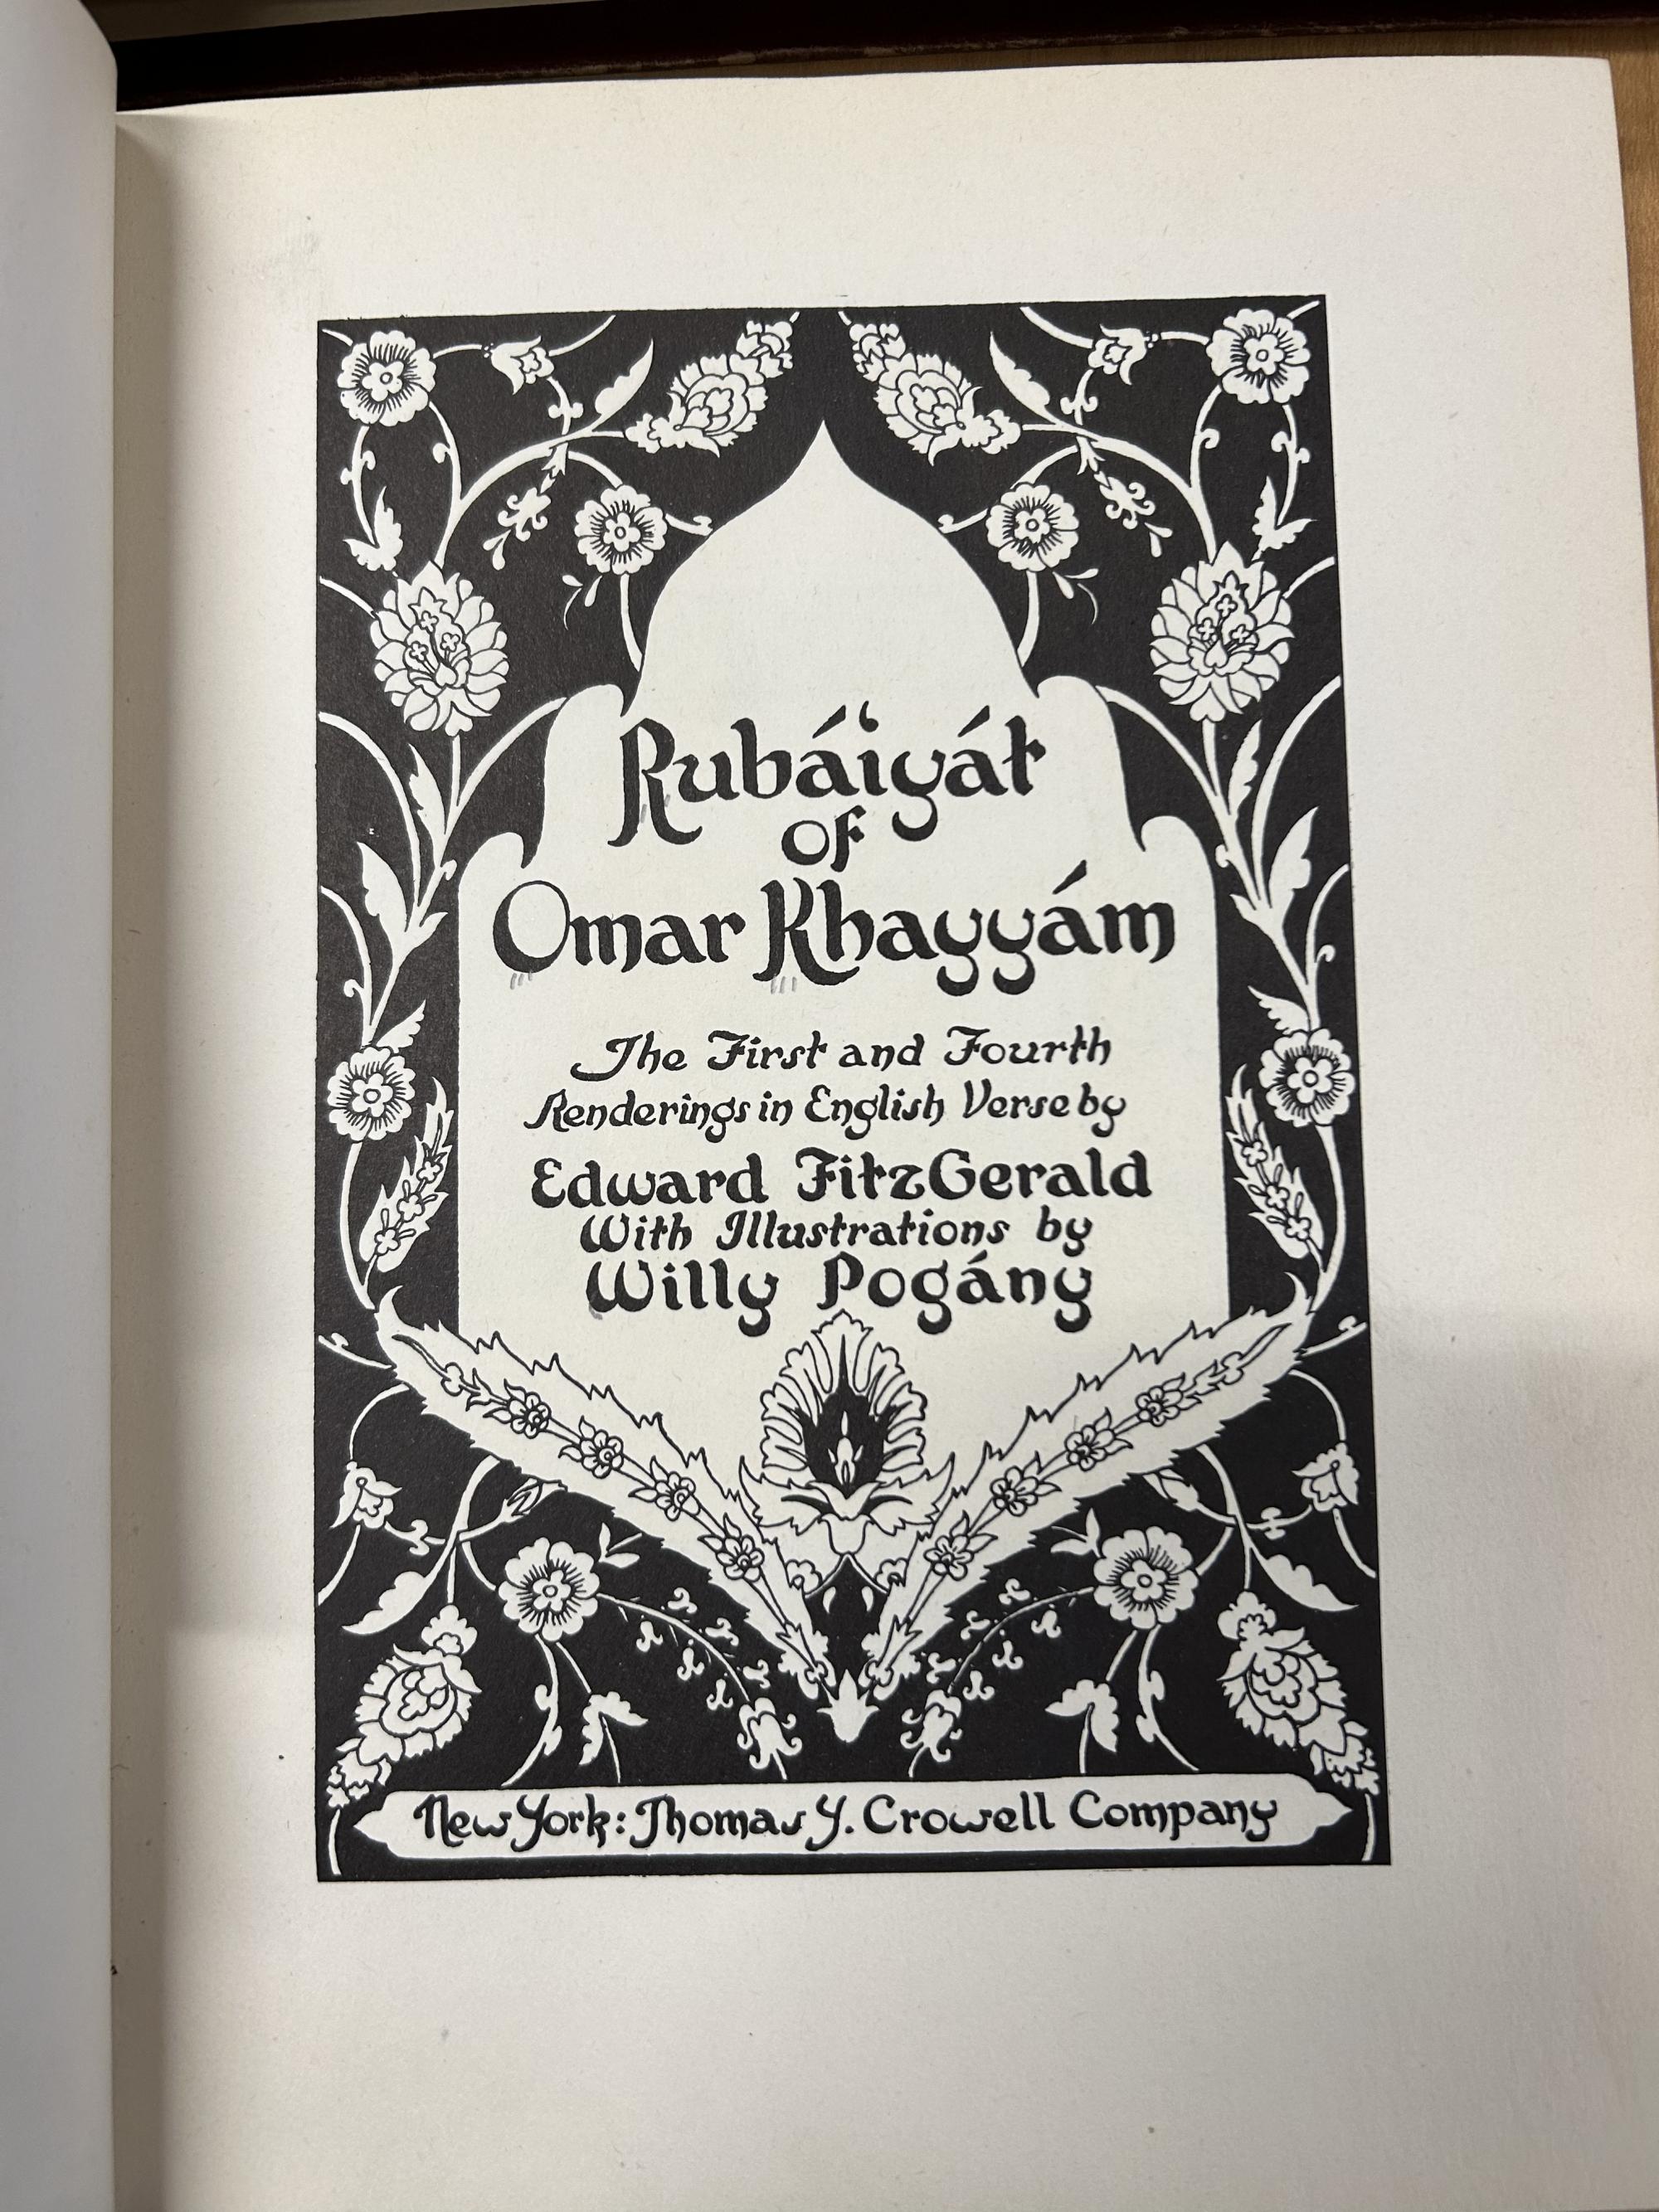 The initial title page on the inside of the text, setting a precedent to the black and white ornament stye and the calligraphy meant to imitate a "Persian" script